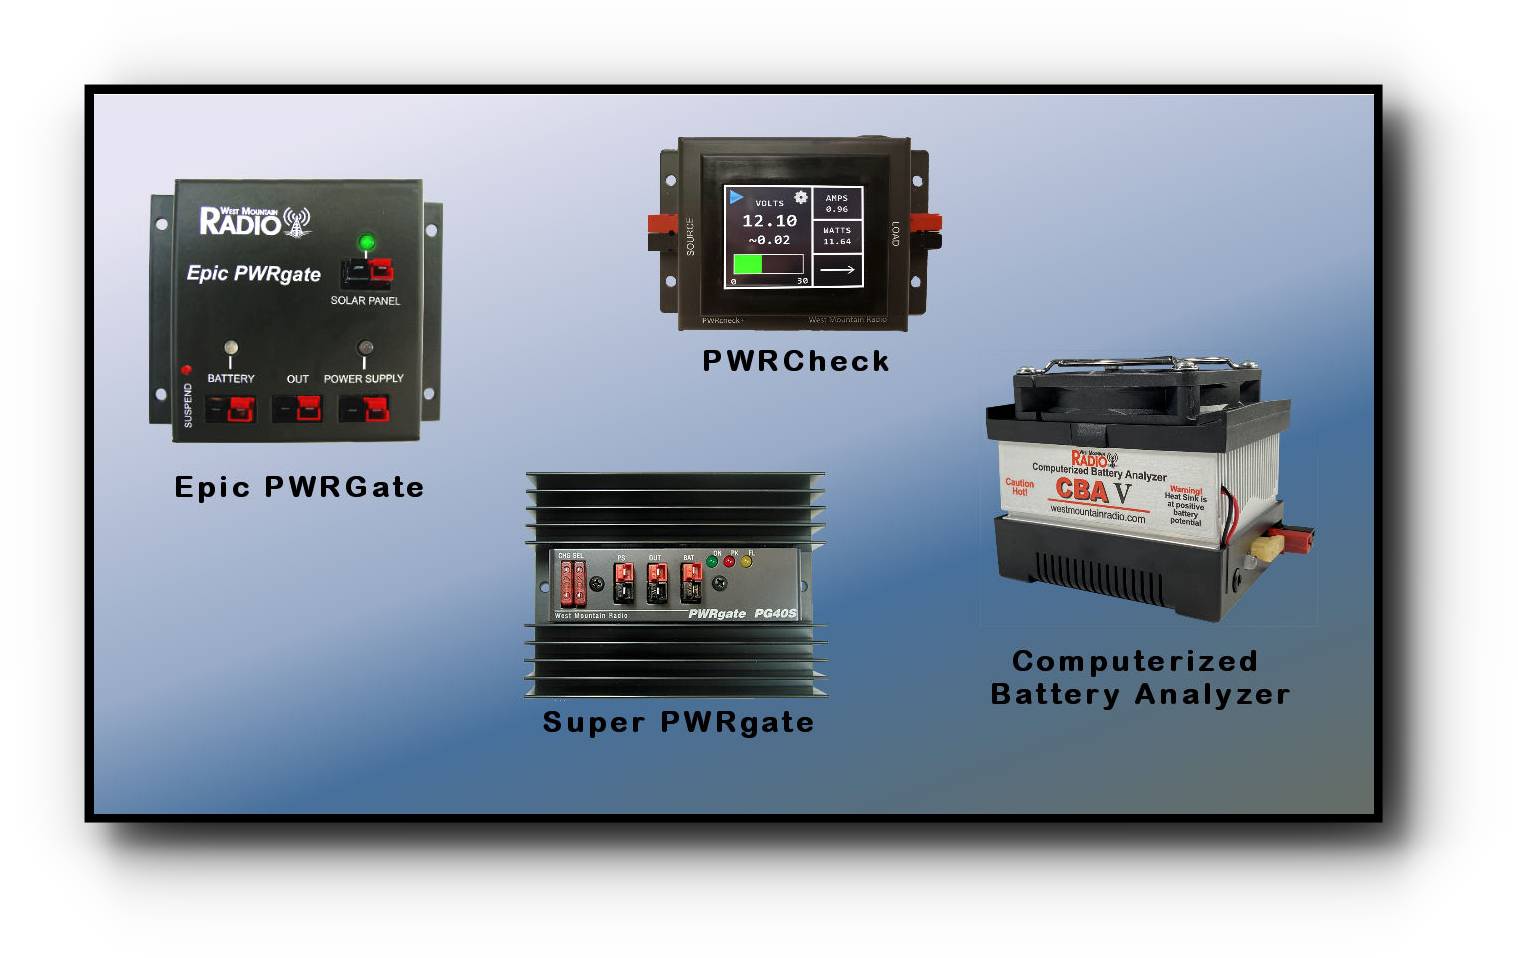 Battery testing hardware and software as well as battery analaysis work